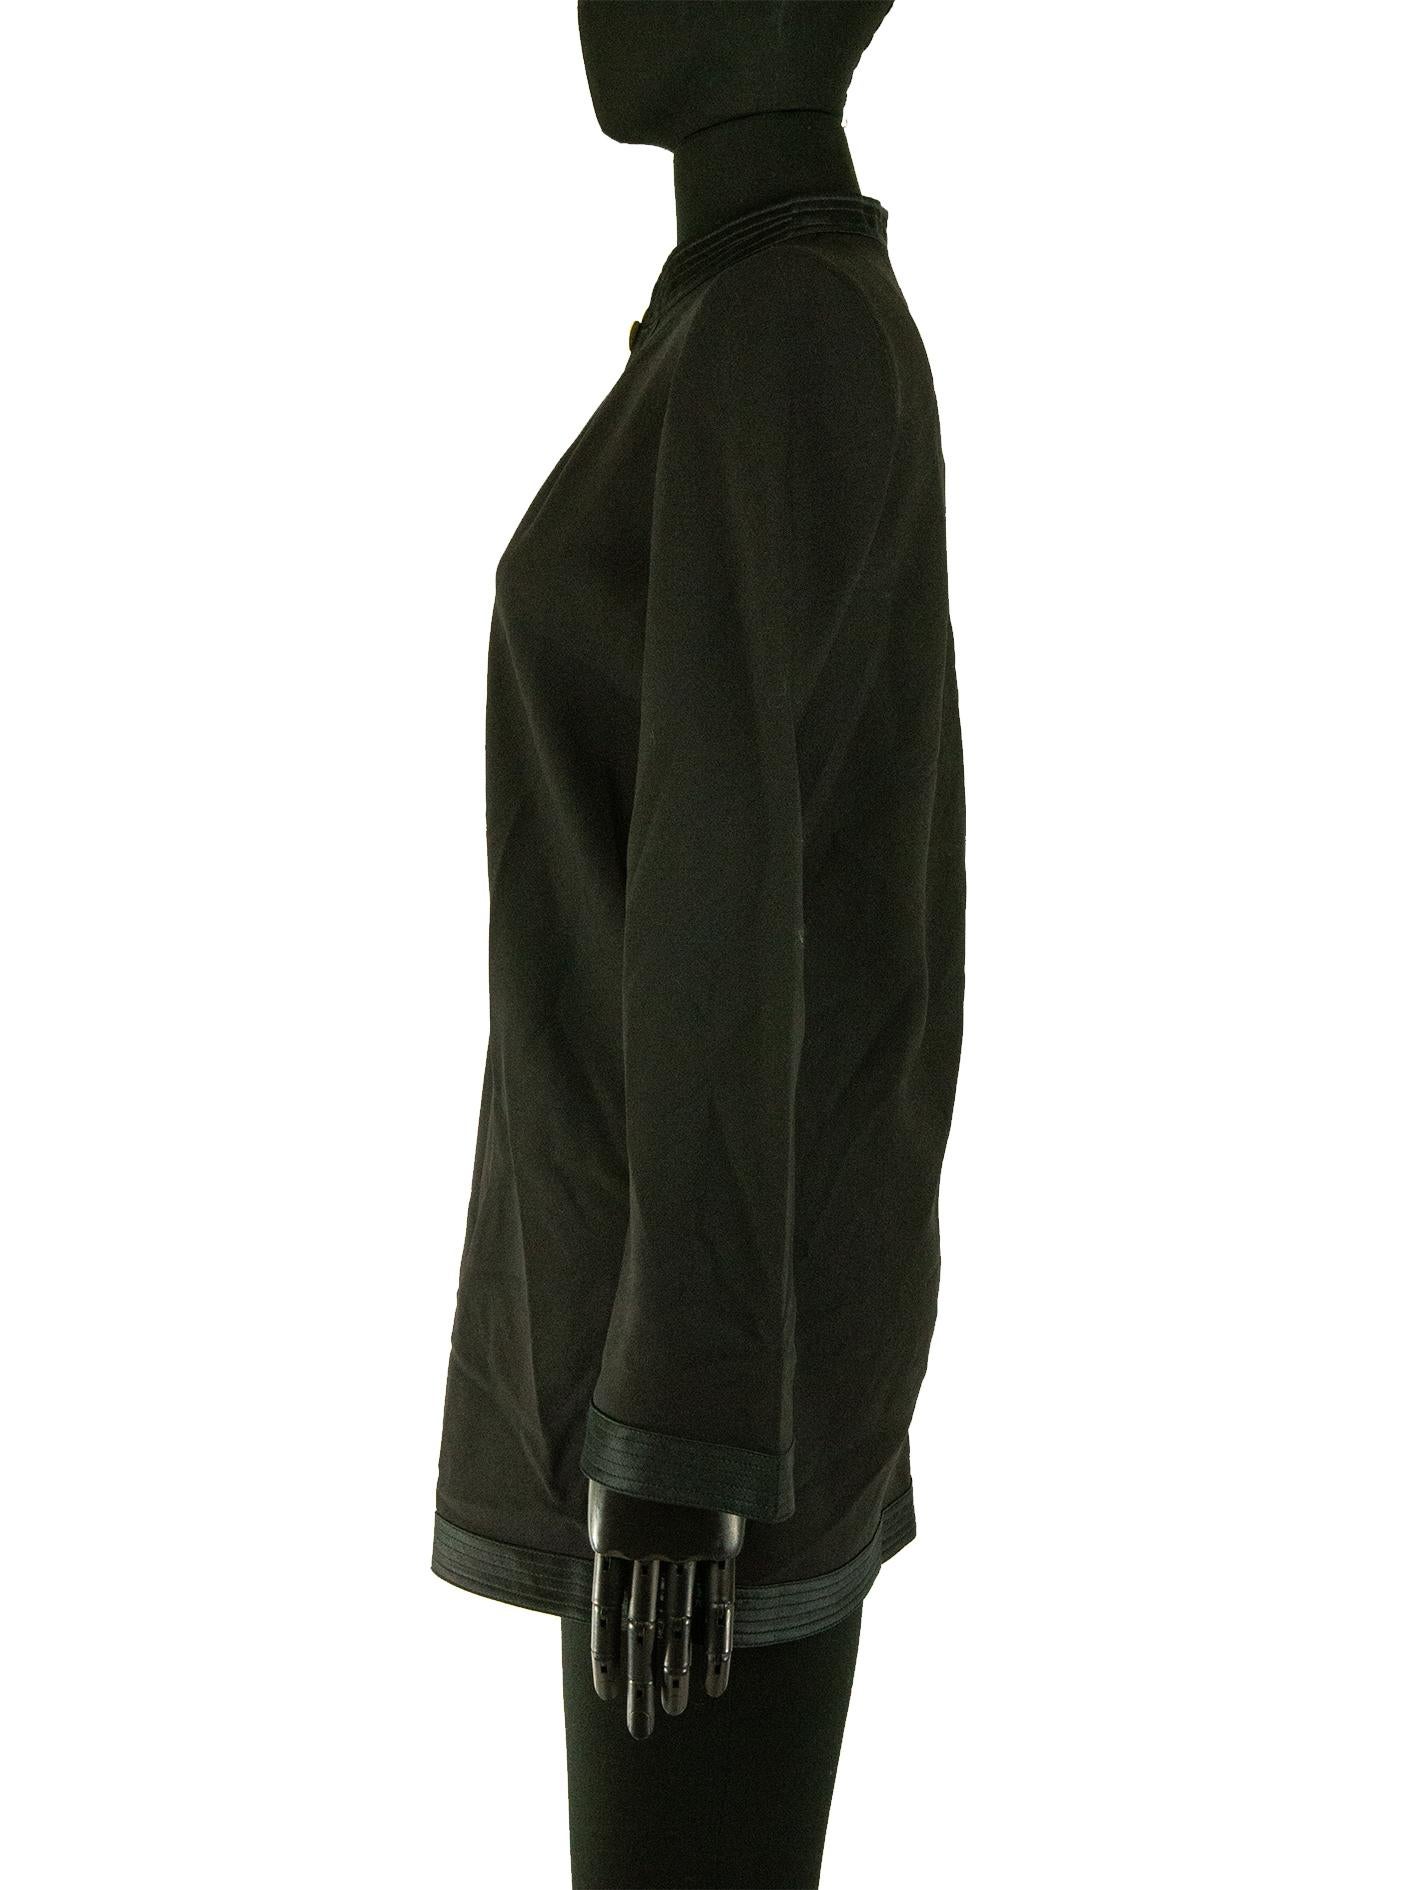 A Louis Vuitton loose-fitting tunic in black wool-based fabric, with satin trimming details. The mandarin satin collar grows into a keep keyhole cut on the neckline, fastened together with a pale yellow flower. This item carries the Louis Vuitton